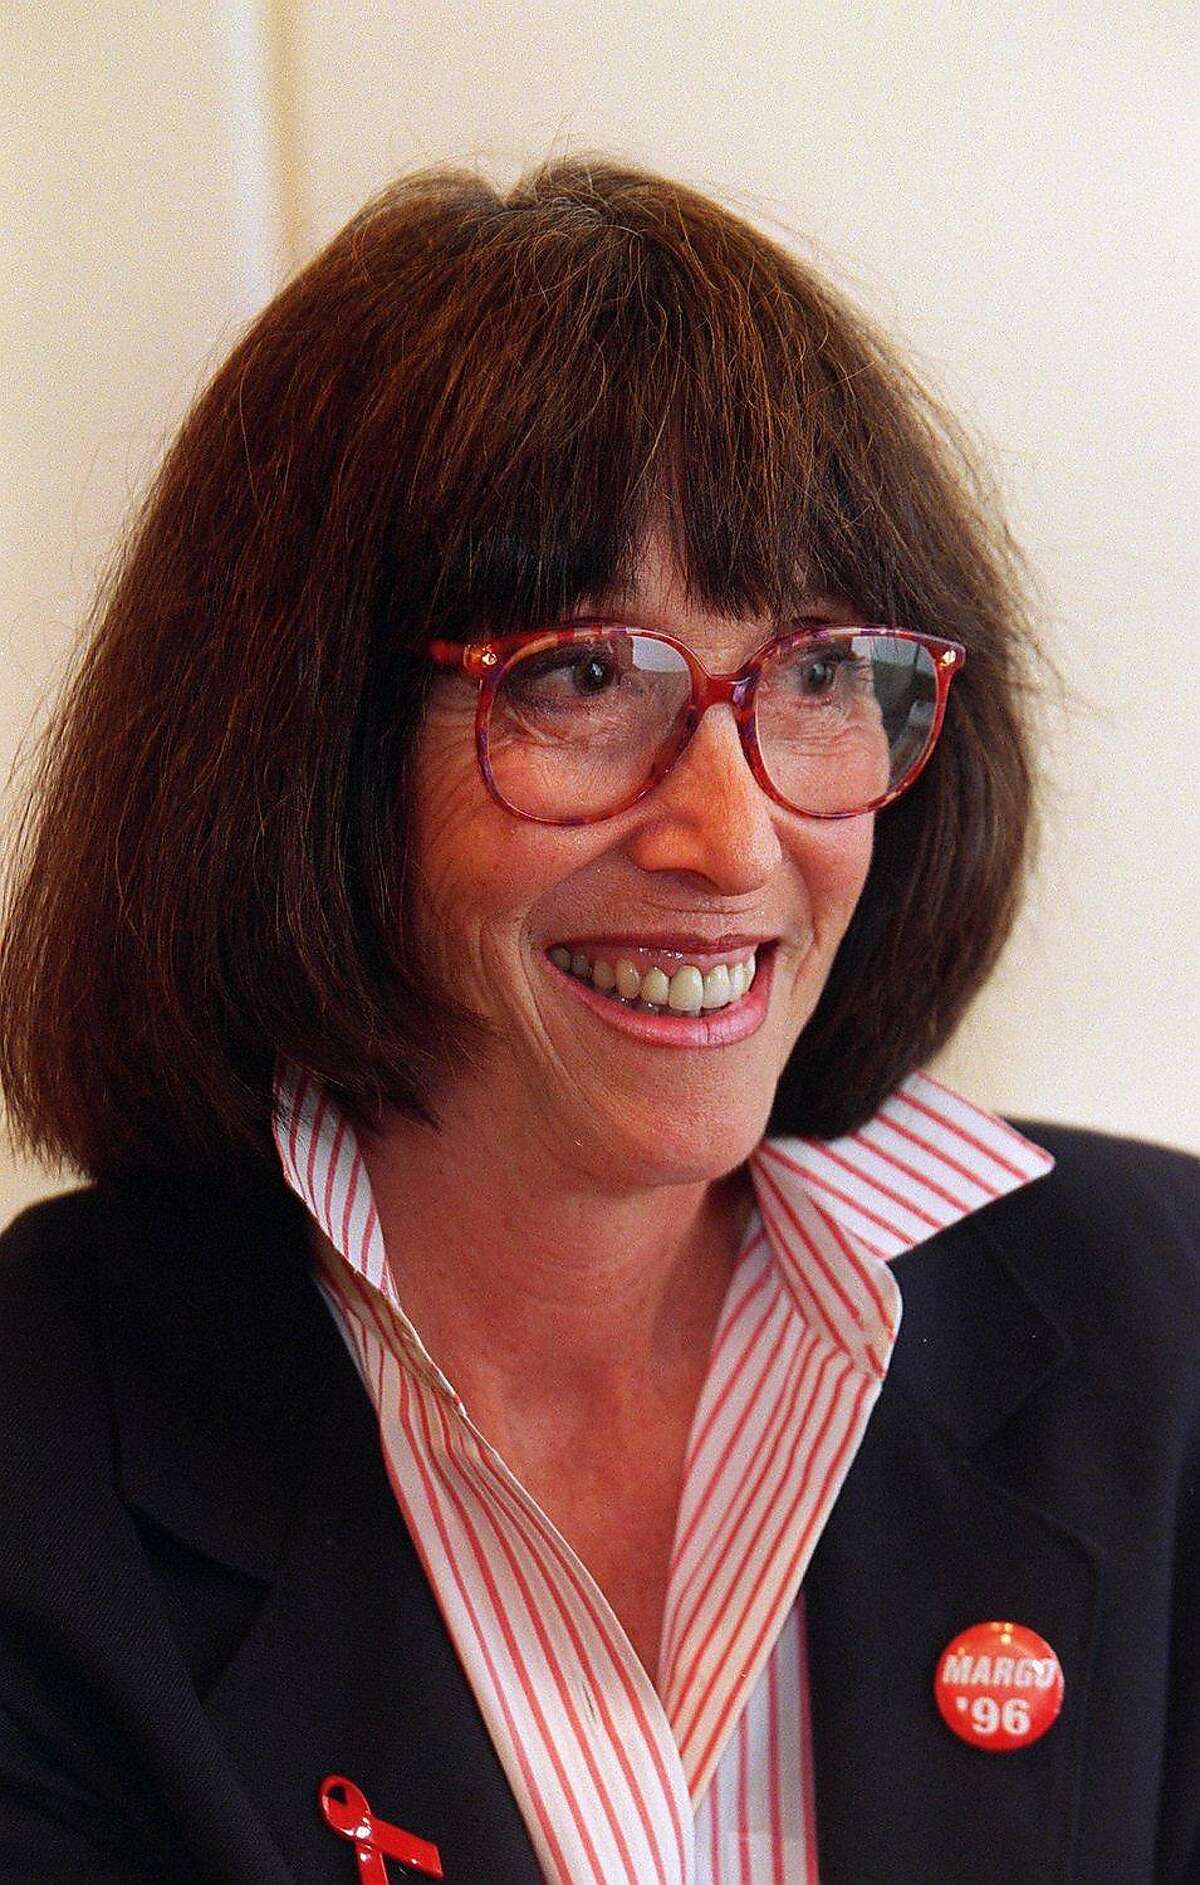 Margo St. James created COYOTE, a group focused on fighting for the rights of sex workers.